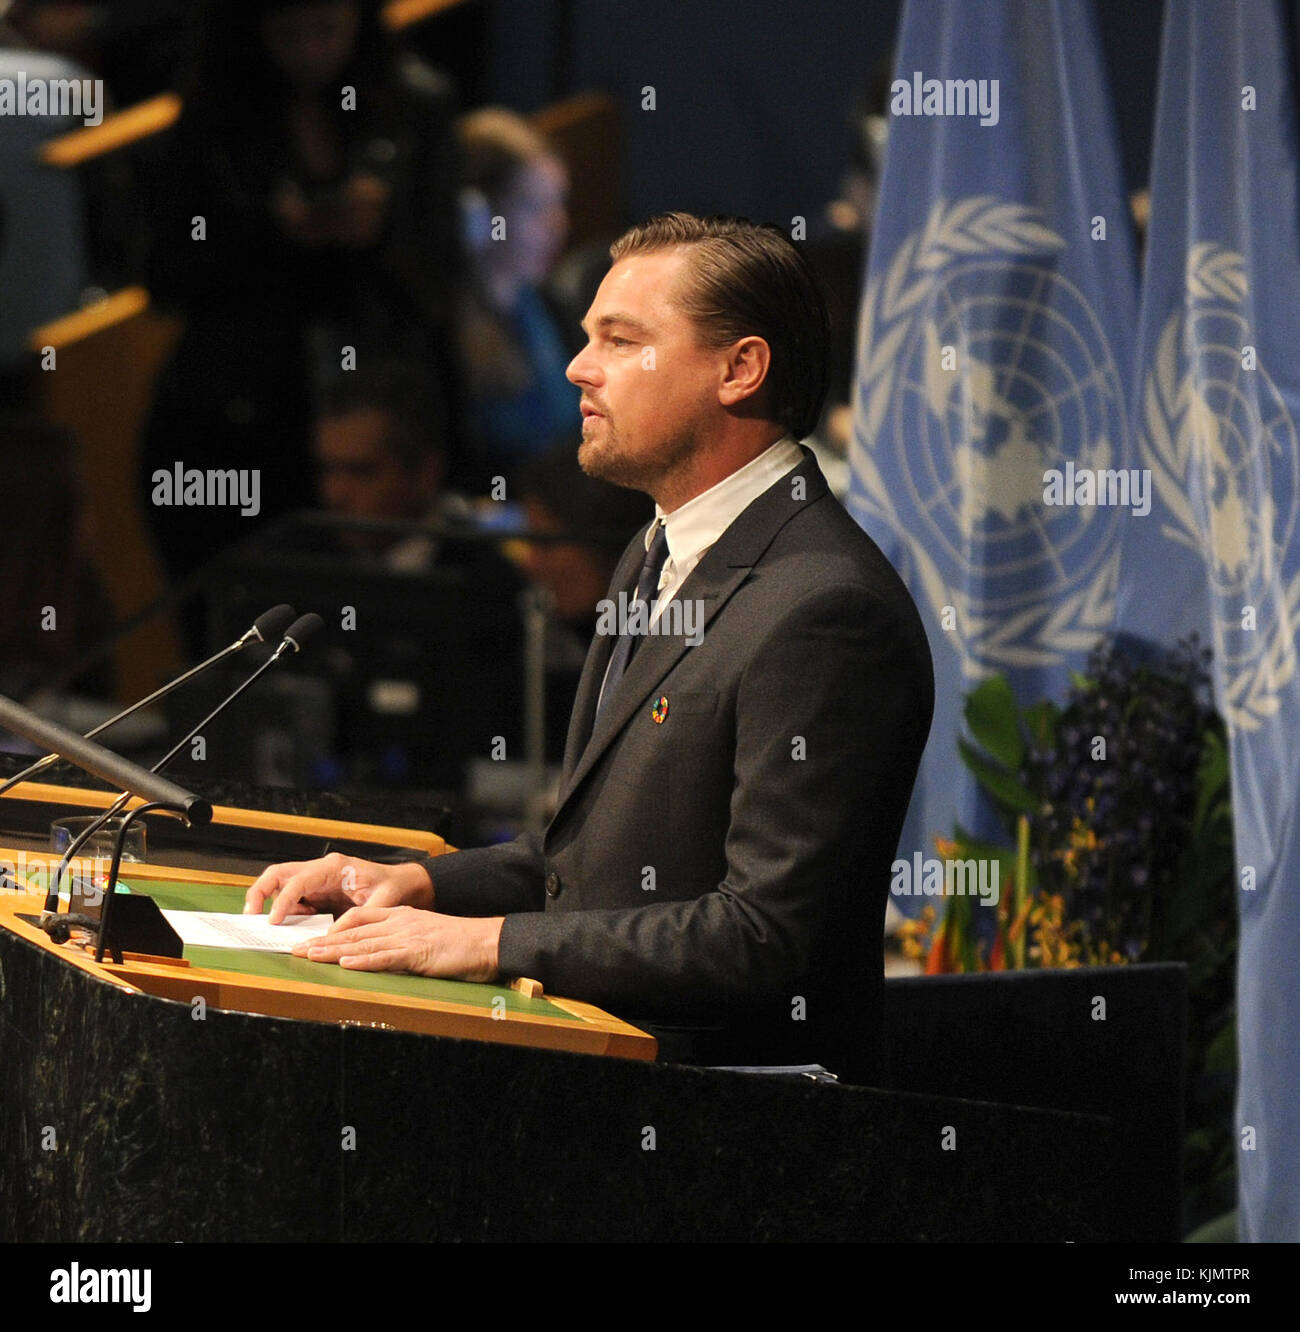 NEW YORK, NY - APRIL 22: Actor/activist Leonardo DiCaprio speaks during the Paris Agreement For Climate Change Signing at United Nations on April 22, 2016 in New York City.   People:  Leonardo DiCaprio Stock Photo